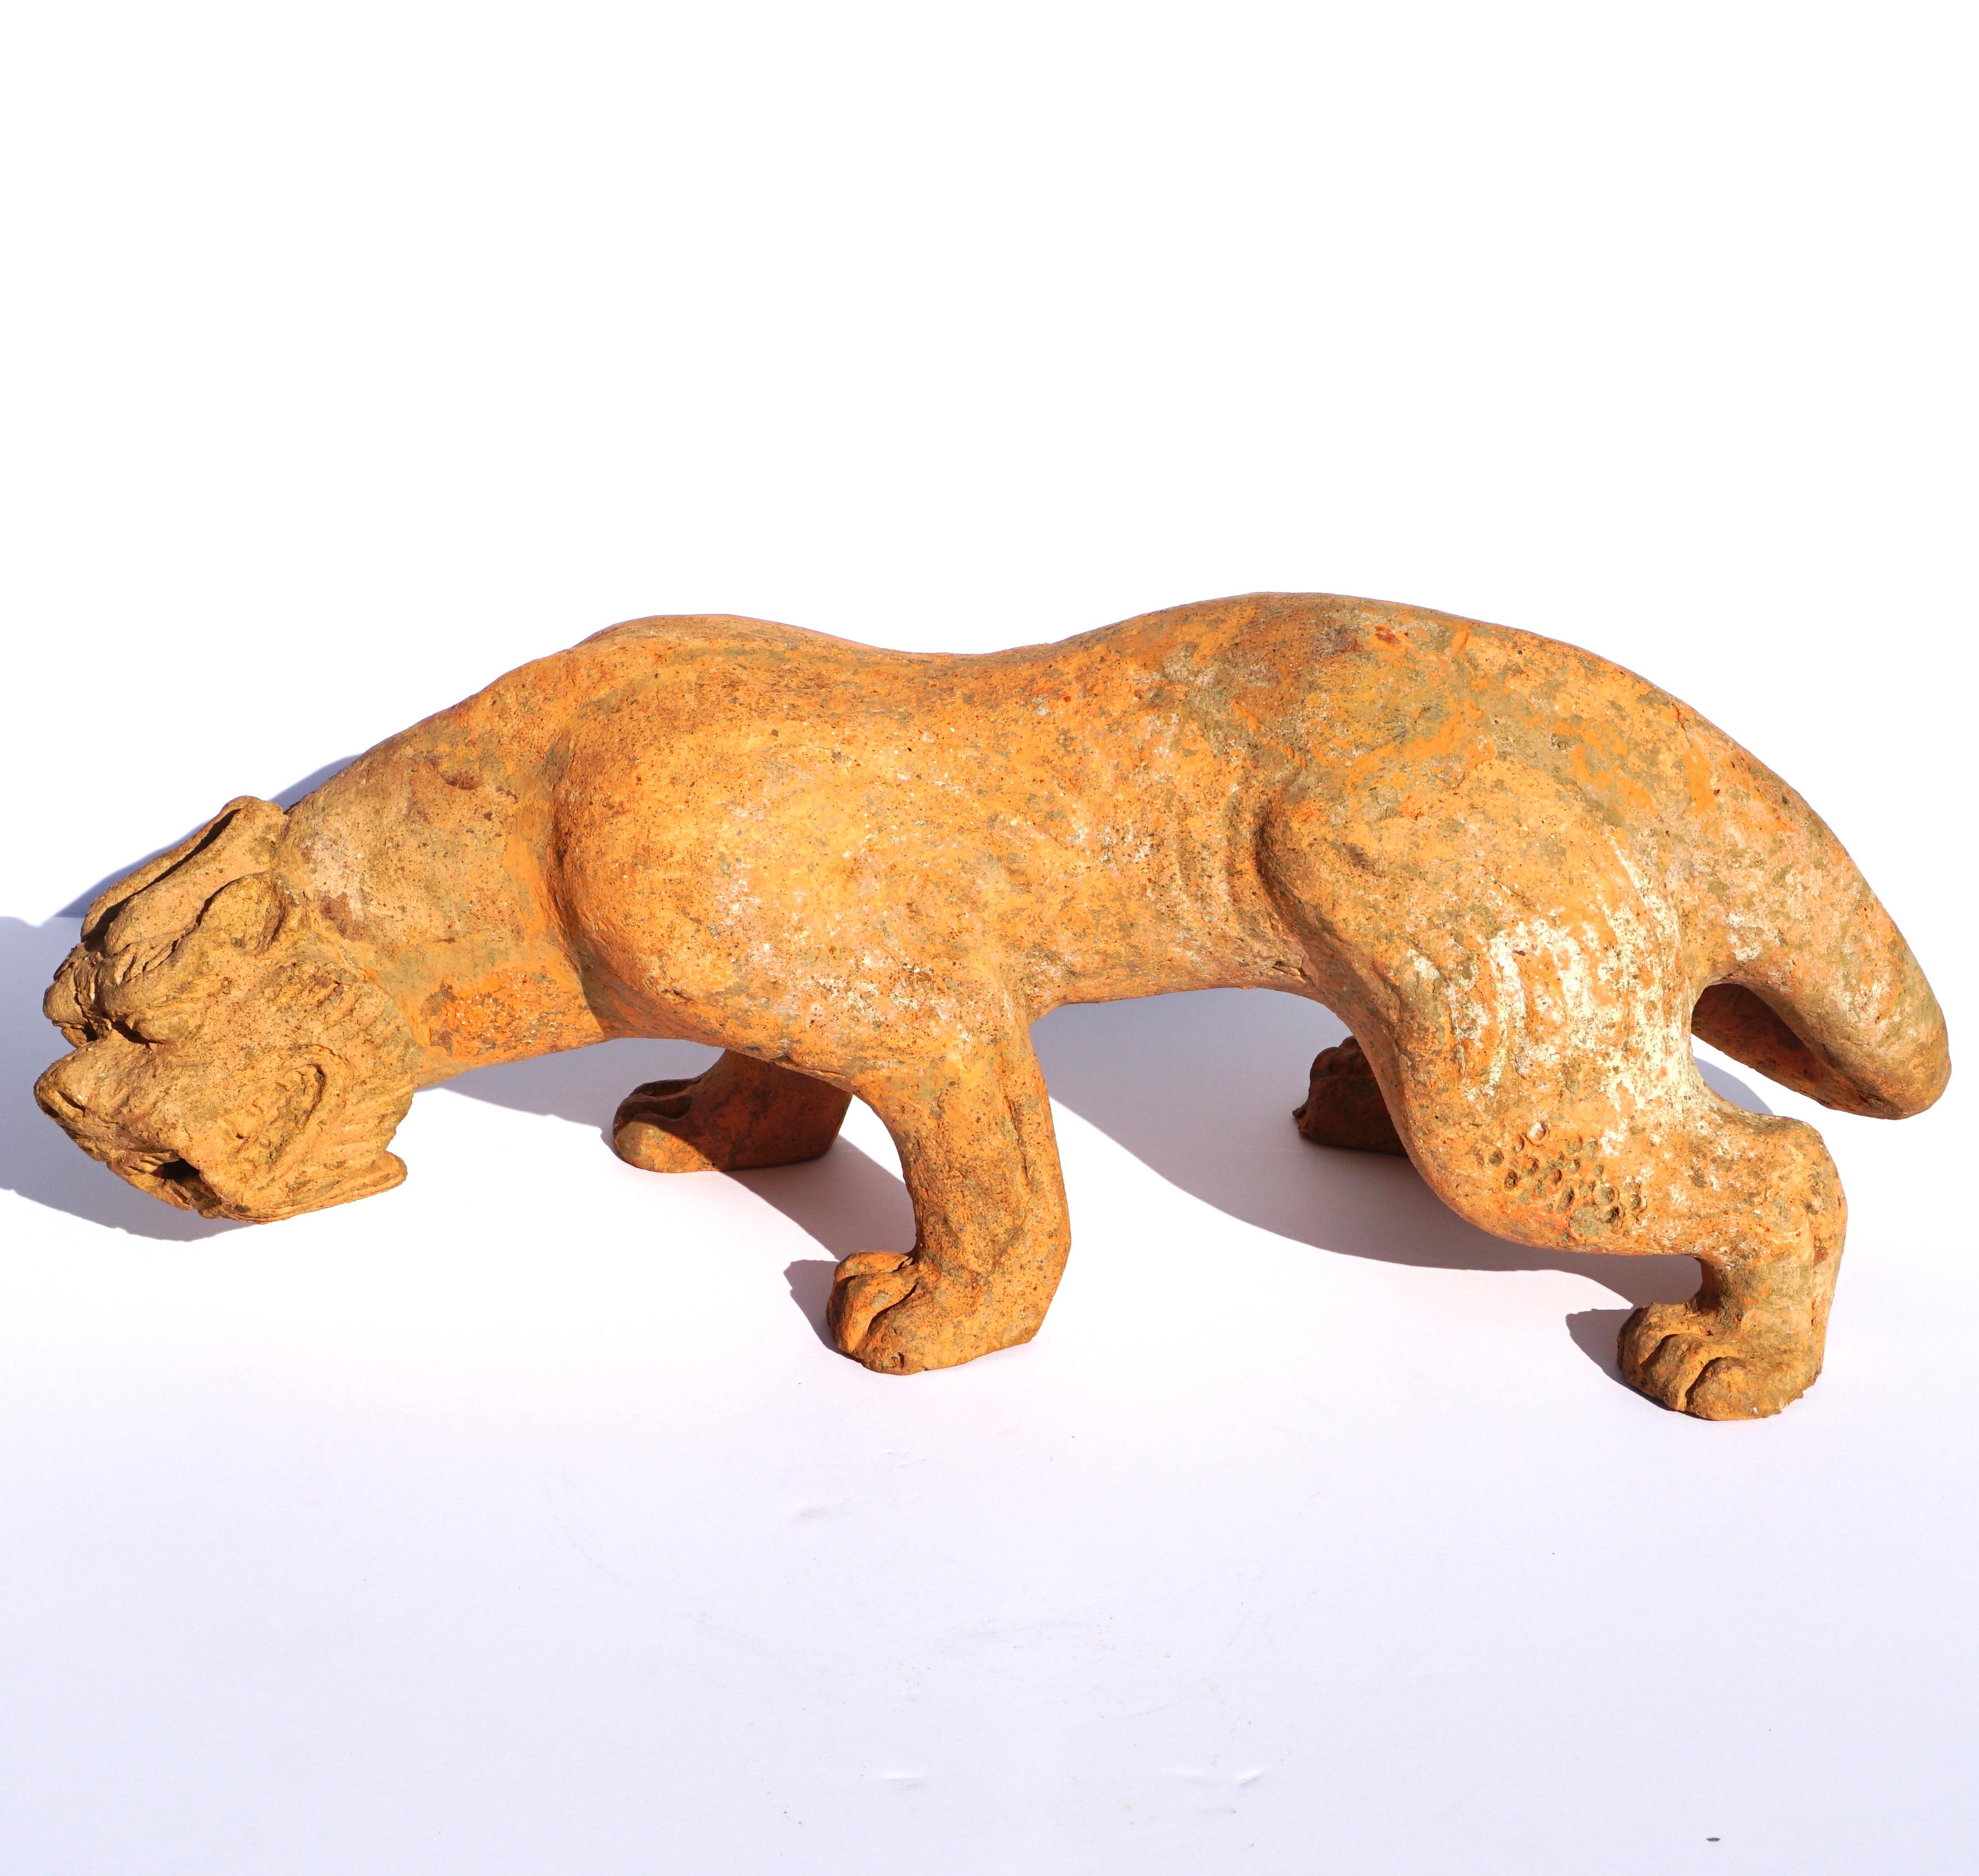 A Large Han Dynasty Terracotta sculpture of a Mythical Beast. TL Tested

I cant emphasize how rare this item is and predict it will not last long. The condition is extraordinary with a few exquisite repairs to 3 legs barely noticeable. Traces of